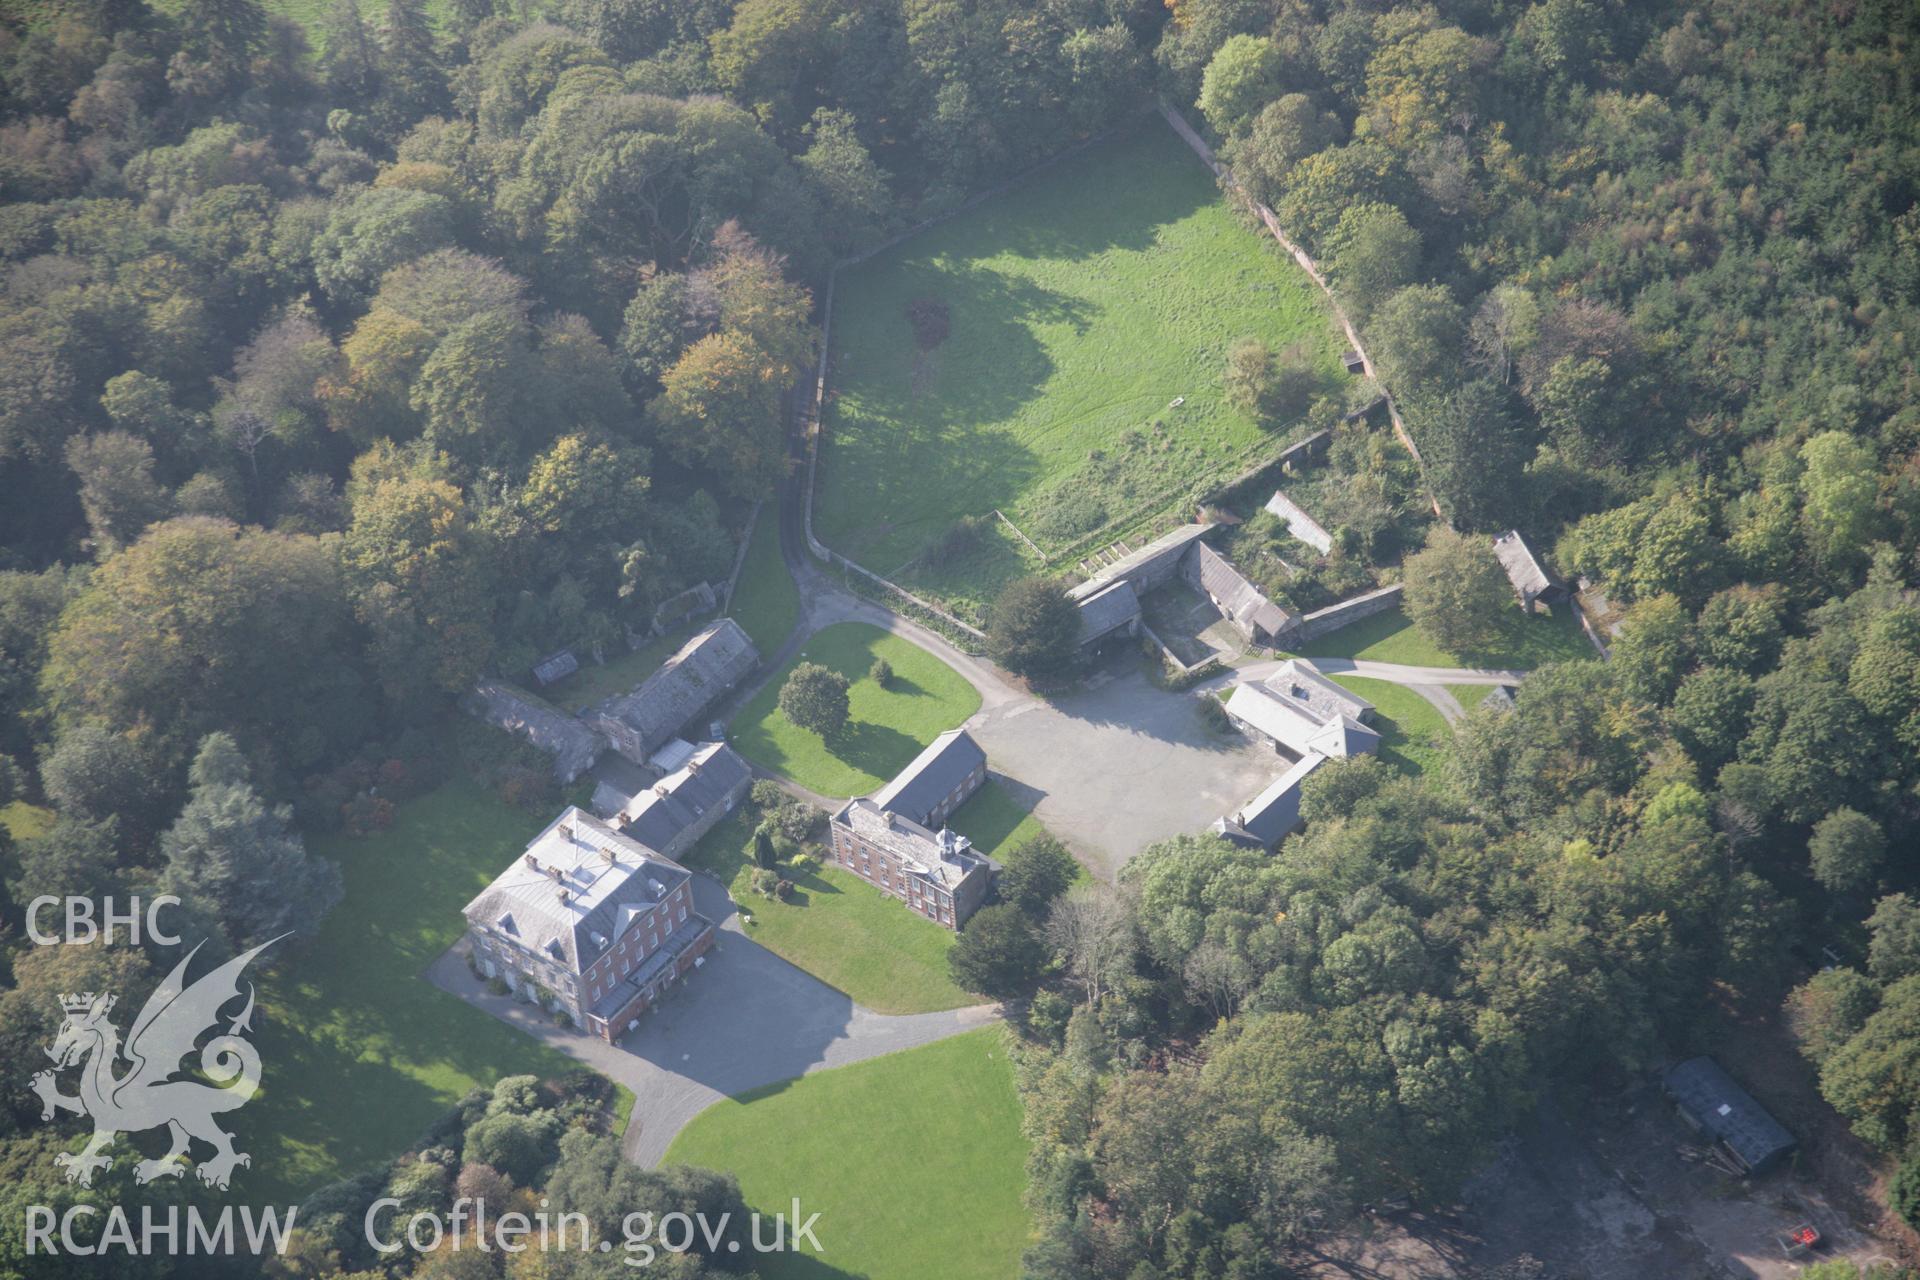 RCAHMW colour oblique aerial photograph of Peniarth Country House, viewed looking west. Taken on 17 October 2005 by Toby Driver